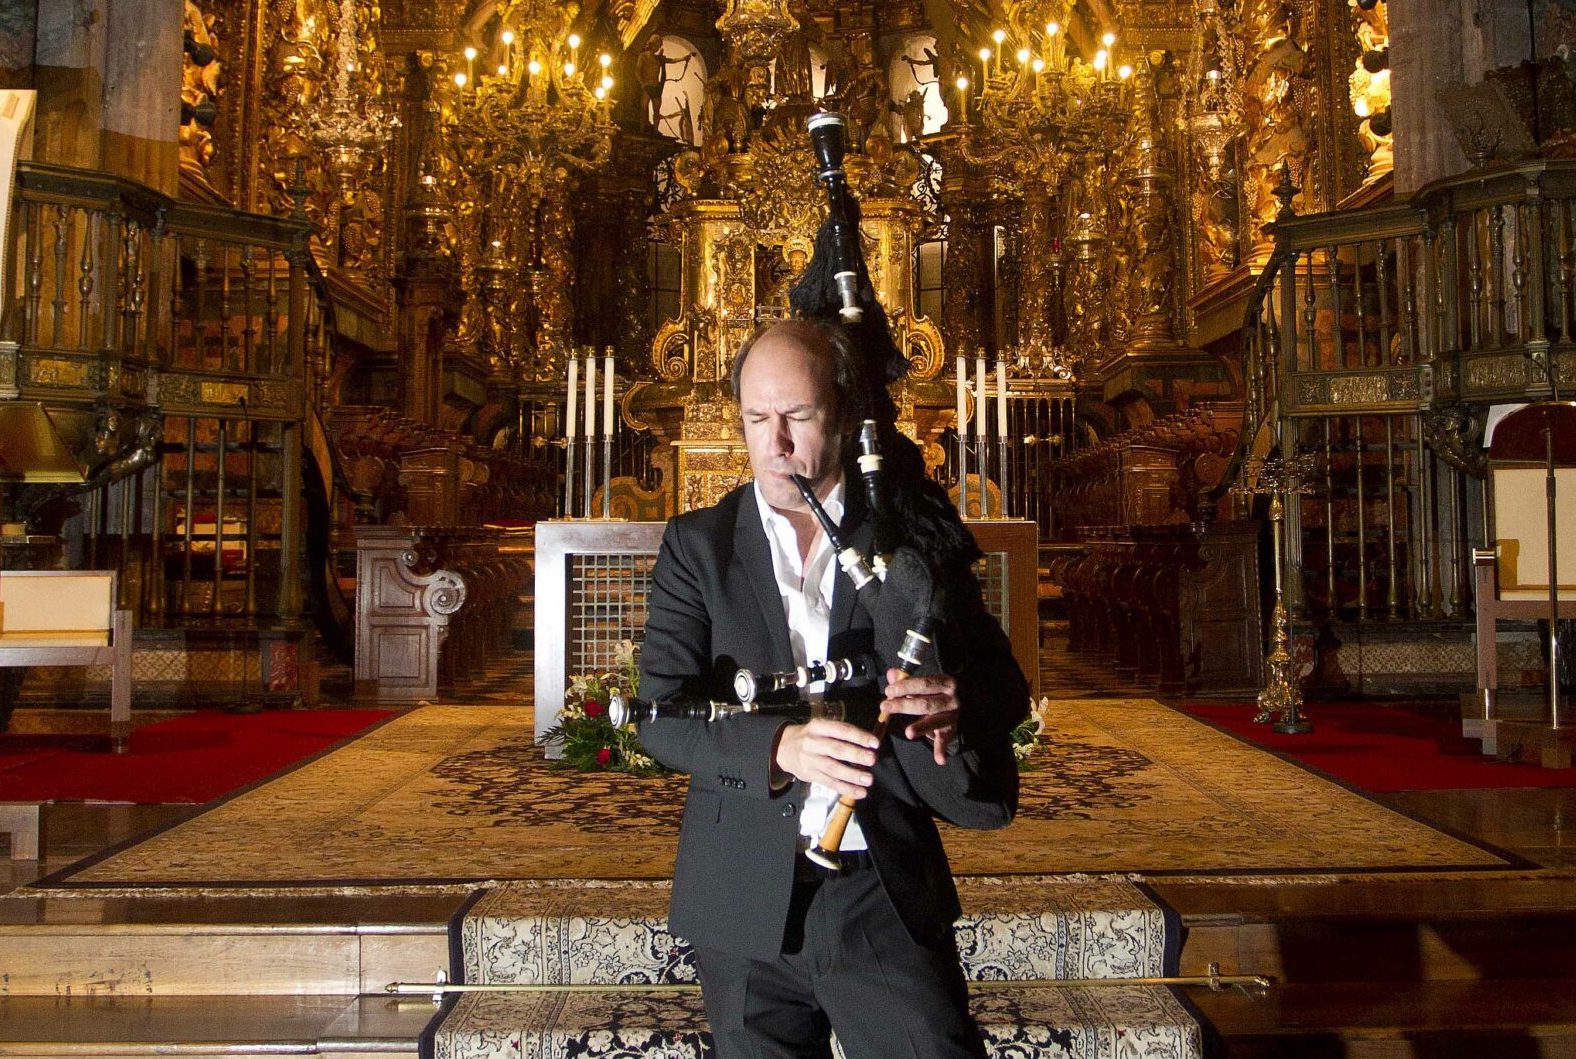 A man in shirt and jacket is playing pipes standing in front of ornate, gold alter and surroundings in a church.